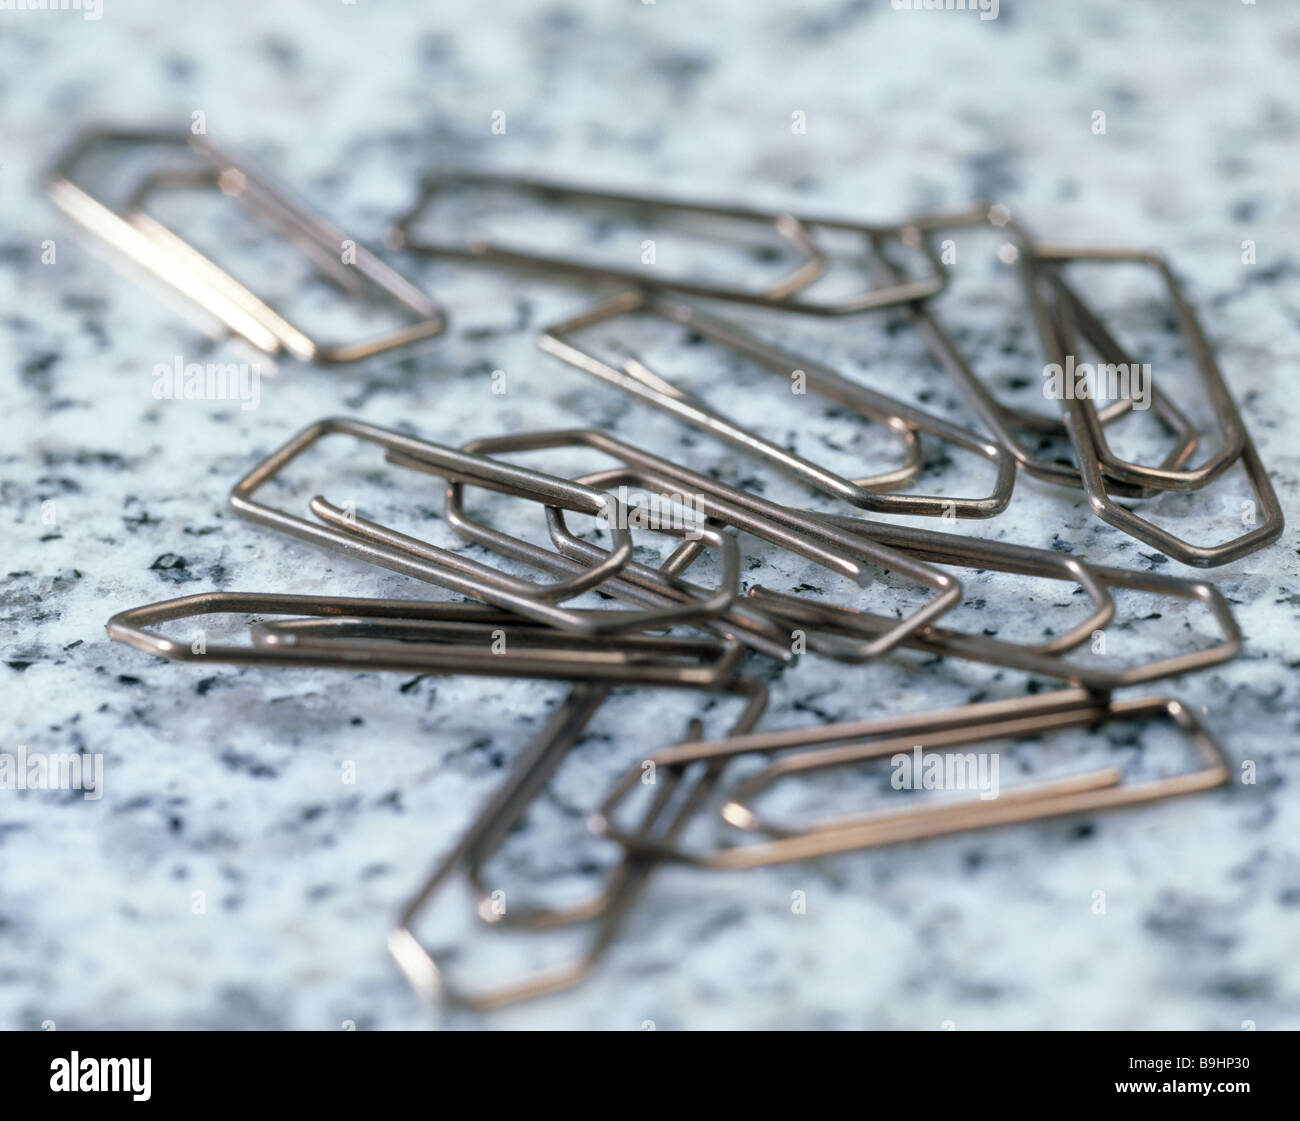 Paper clips close-up fuzziness objects aids office-articles office-couplerials office supply office-couplerial metal-clamps Stock Photo